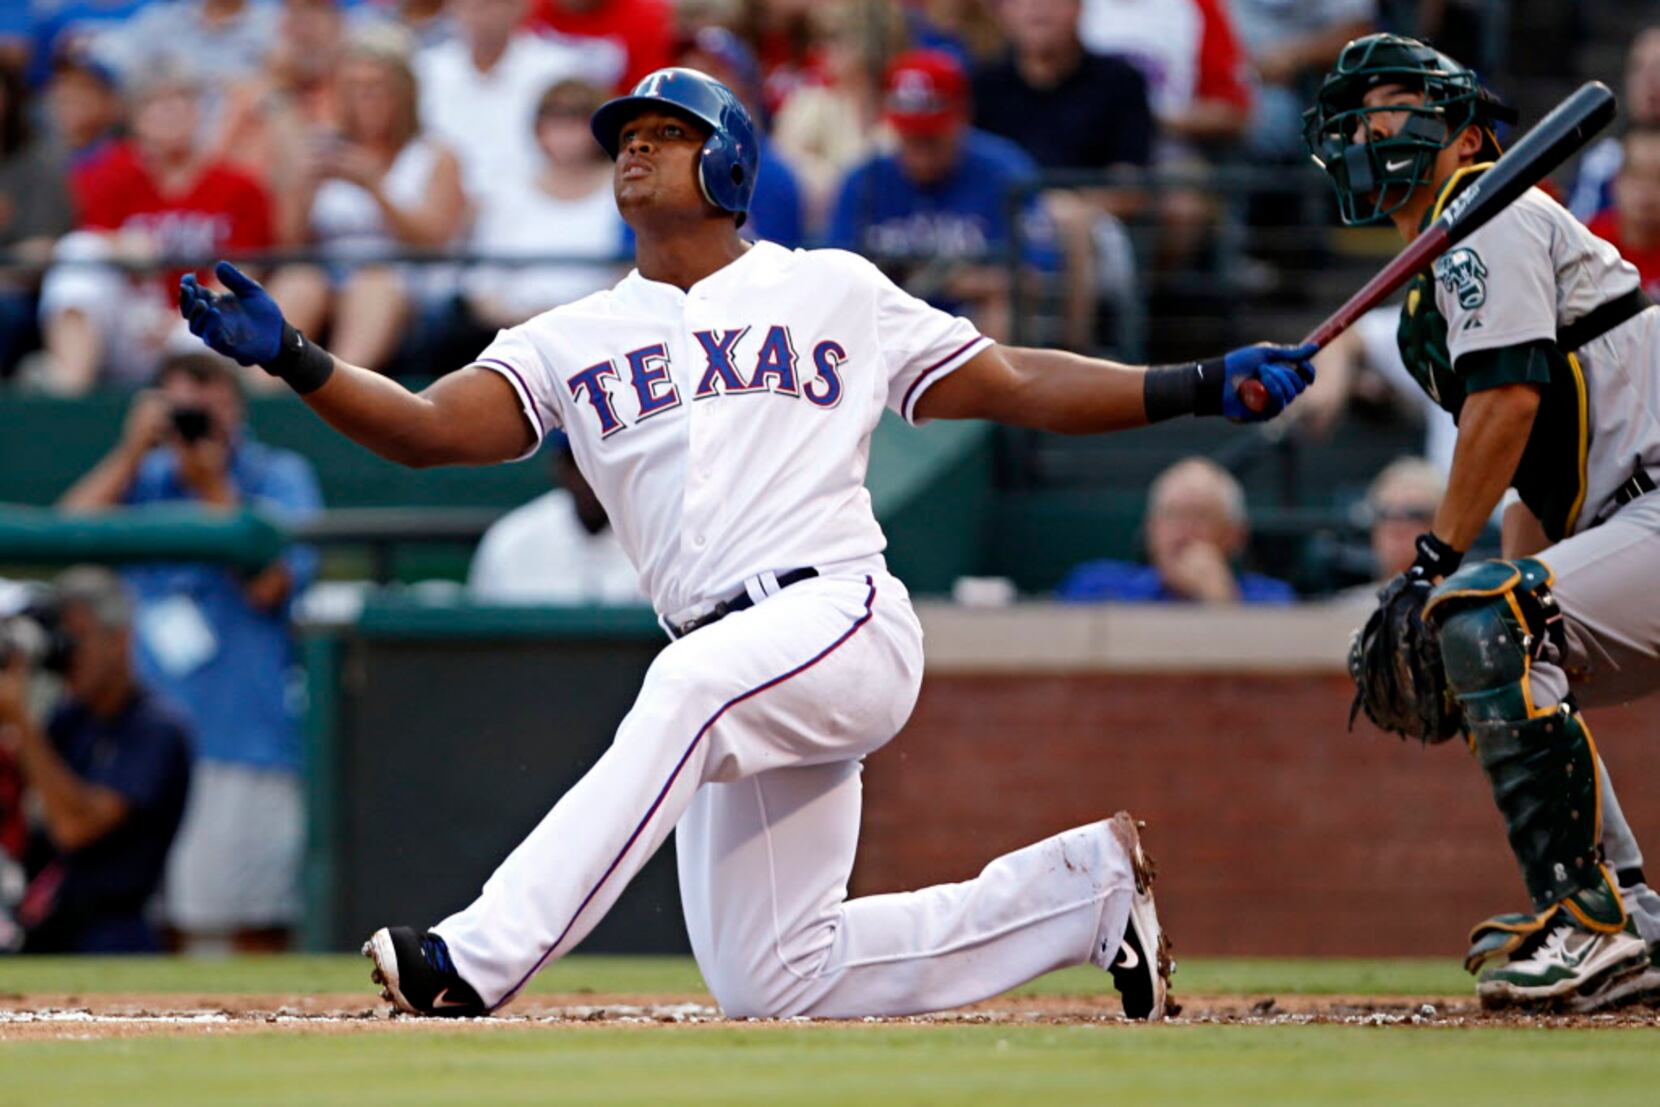 Beltre slam 1 of 4 Texas homers in win over Boston - The San Diego